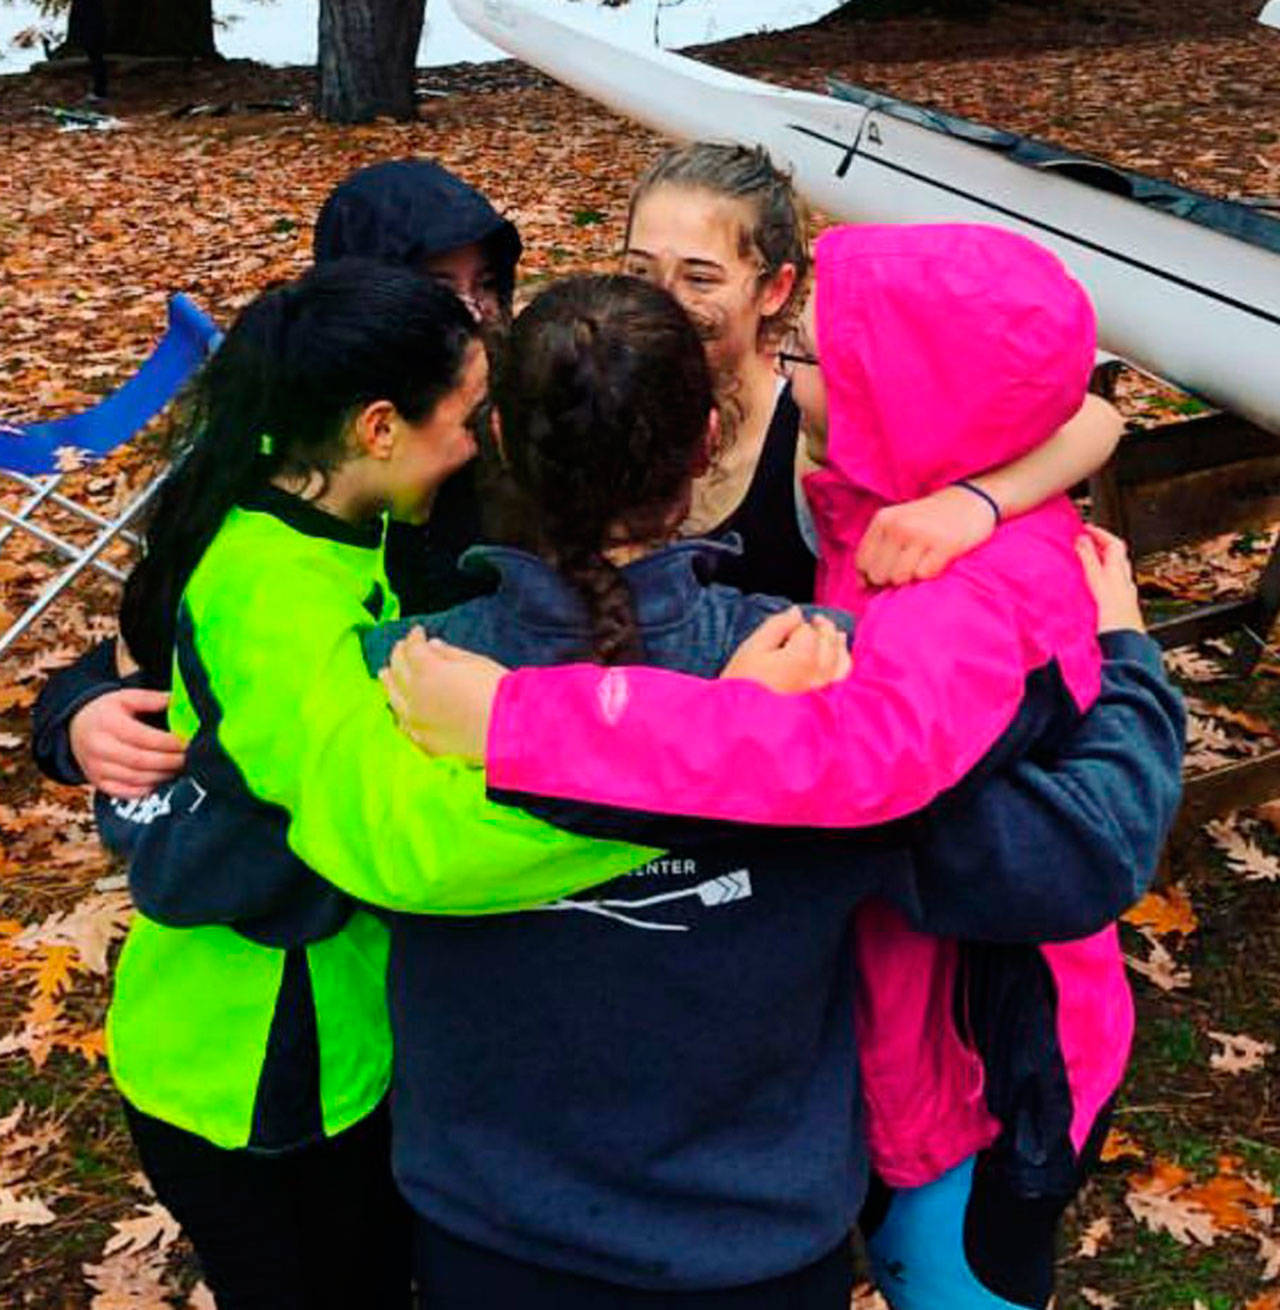 Members the VIRC/Renton Rowing Club composite novice women’s four (and coxswain) celebrate their gold medal row at the Frostbite Regatta last Saturday at Seattle’s Green Lake. (Photo by Taegan Lynch)